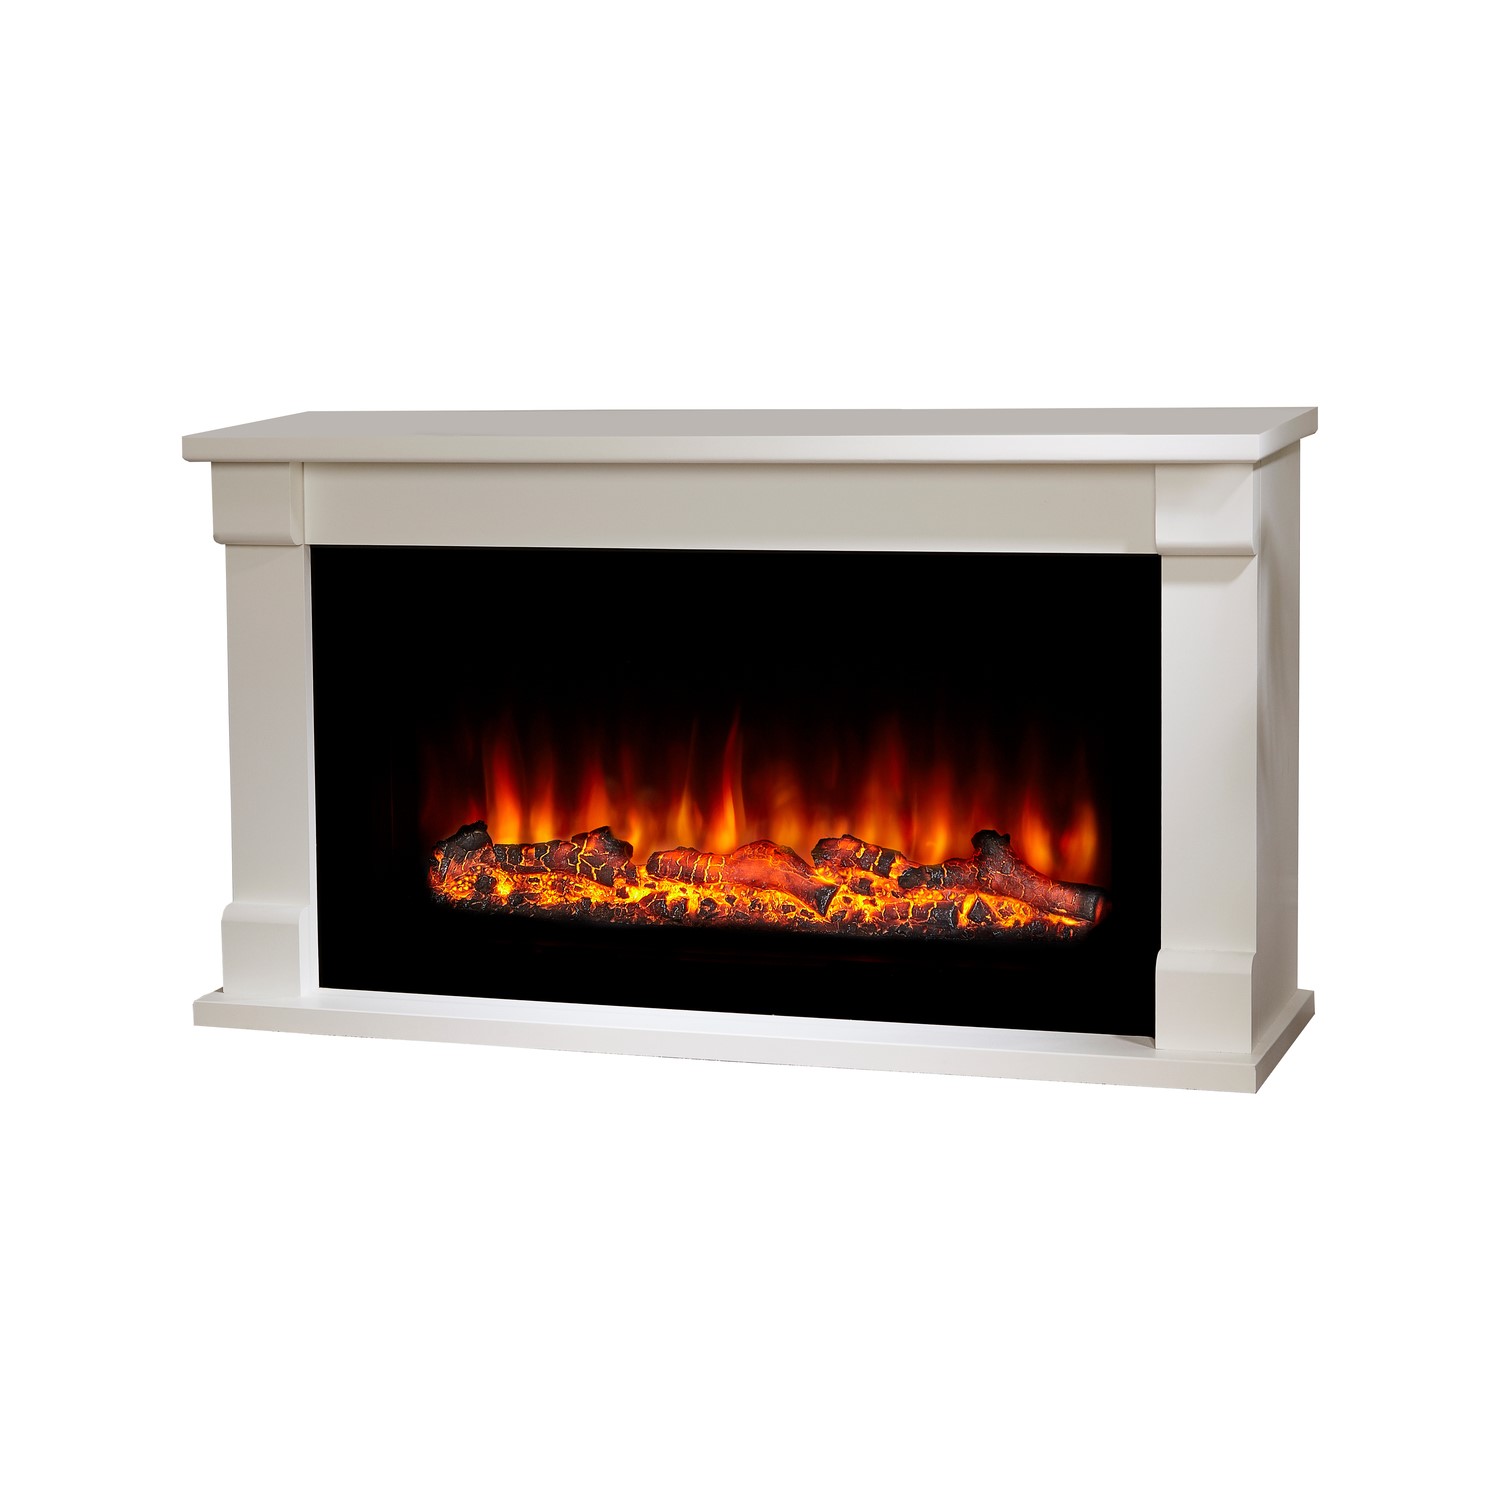 Read more about Suncrest white freestanding wide electric fireplace suite bradbury